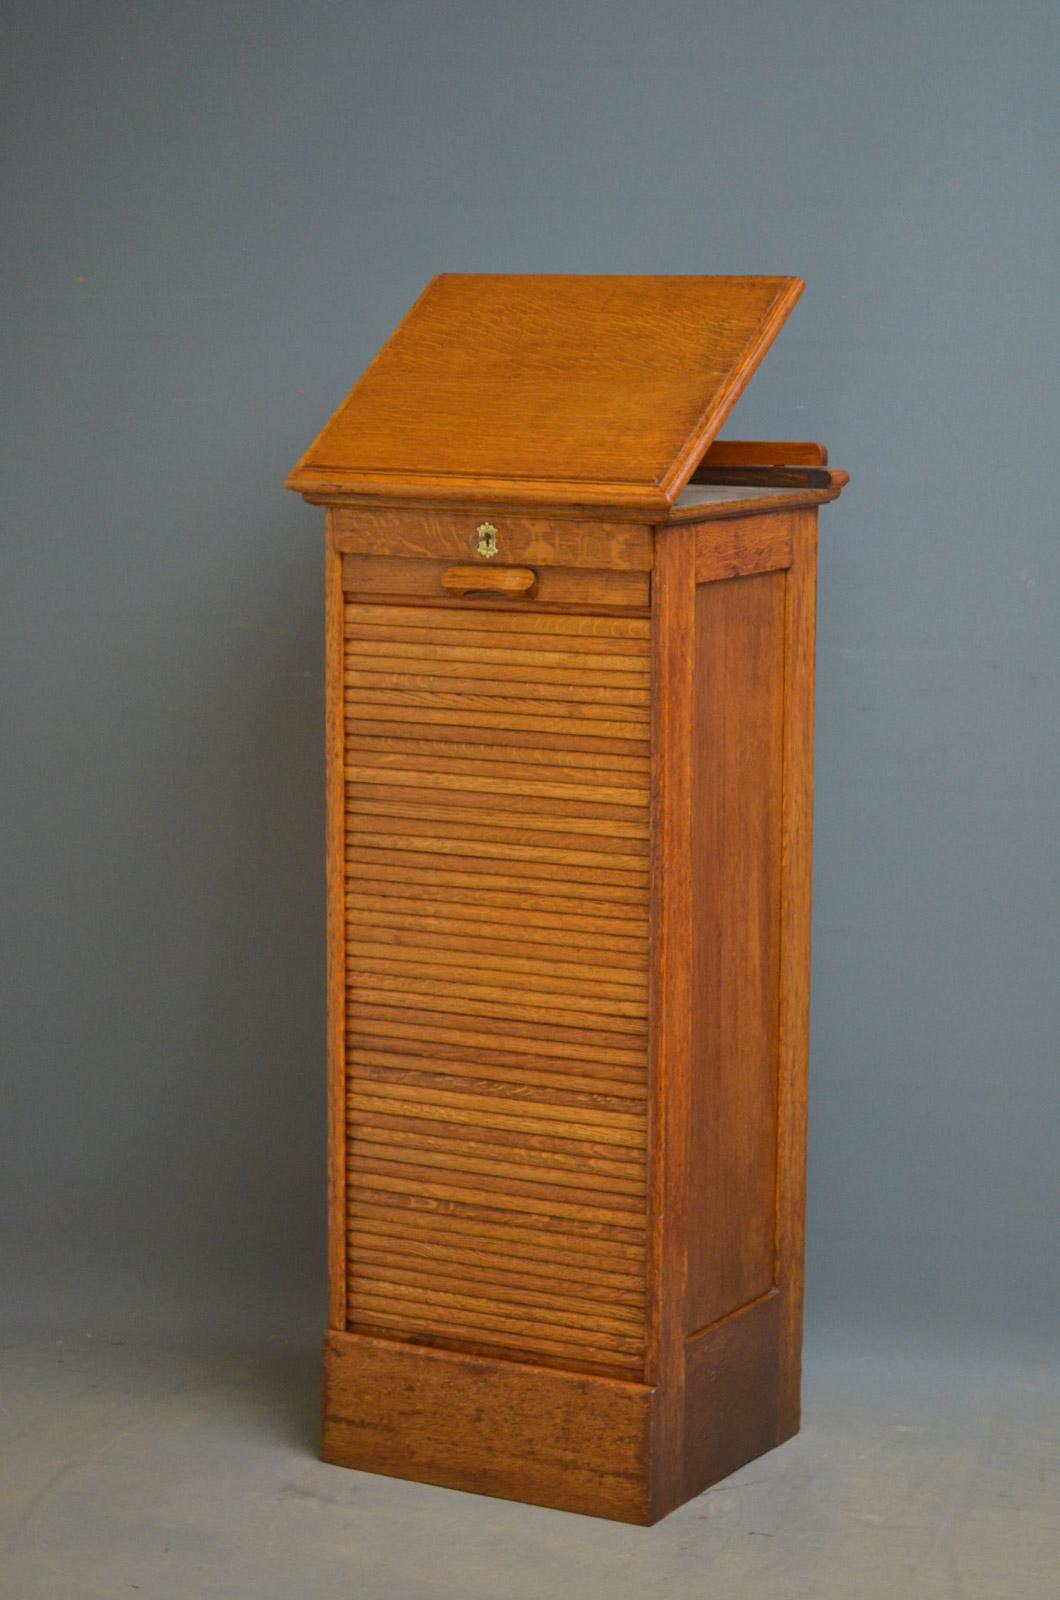 Sn4467, turn of the century oak, tambour fronted filing cabinet of soft color, having molded lift up top and paneled sides above tambour front enclosing 9 drawers, fitted with original working lock and key, standing on plinth base. This antique